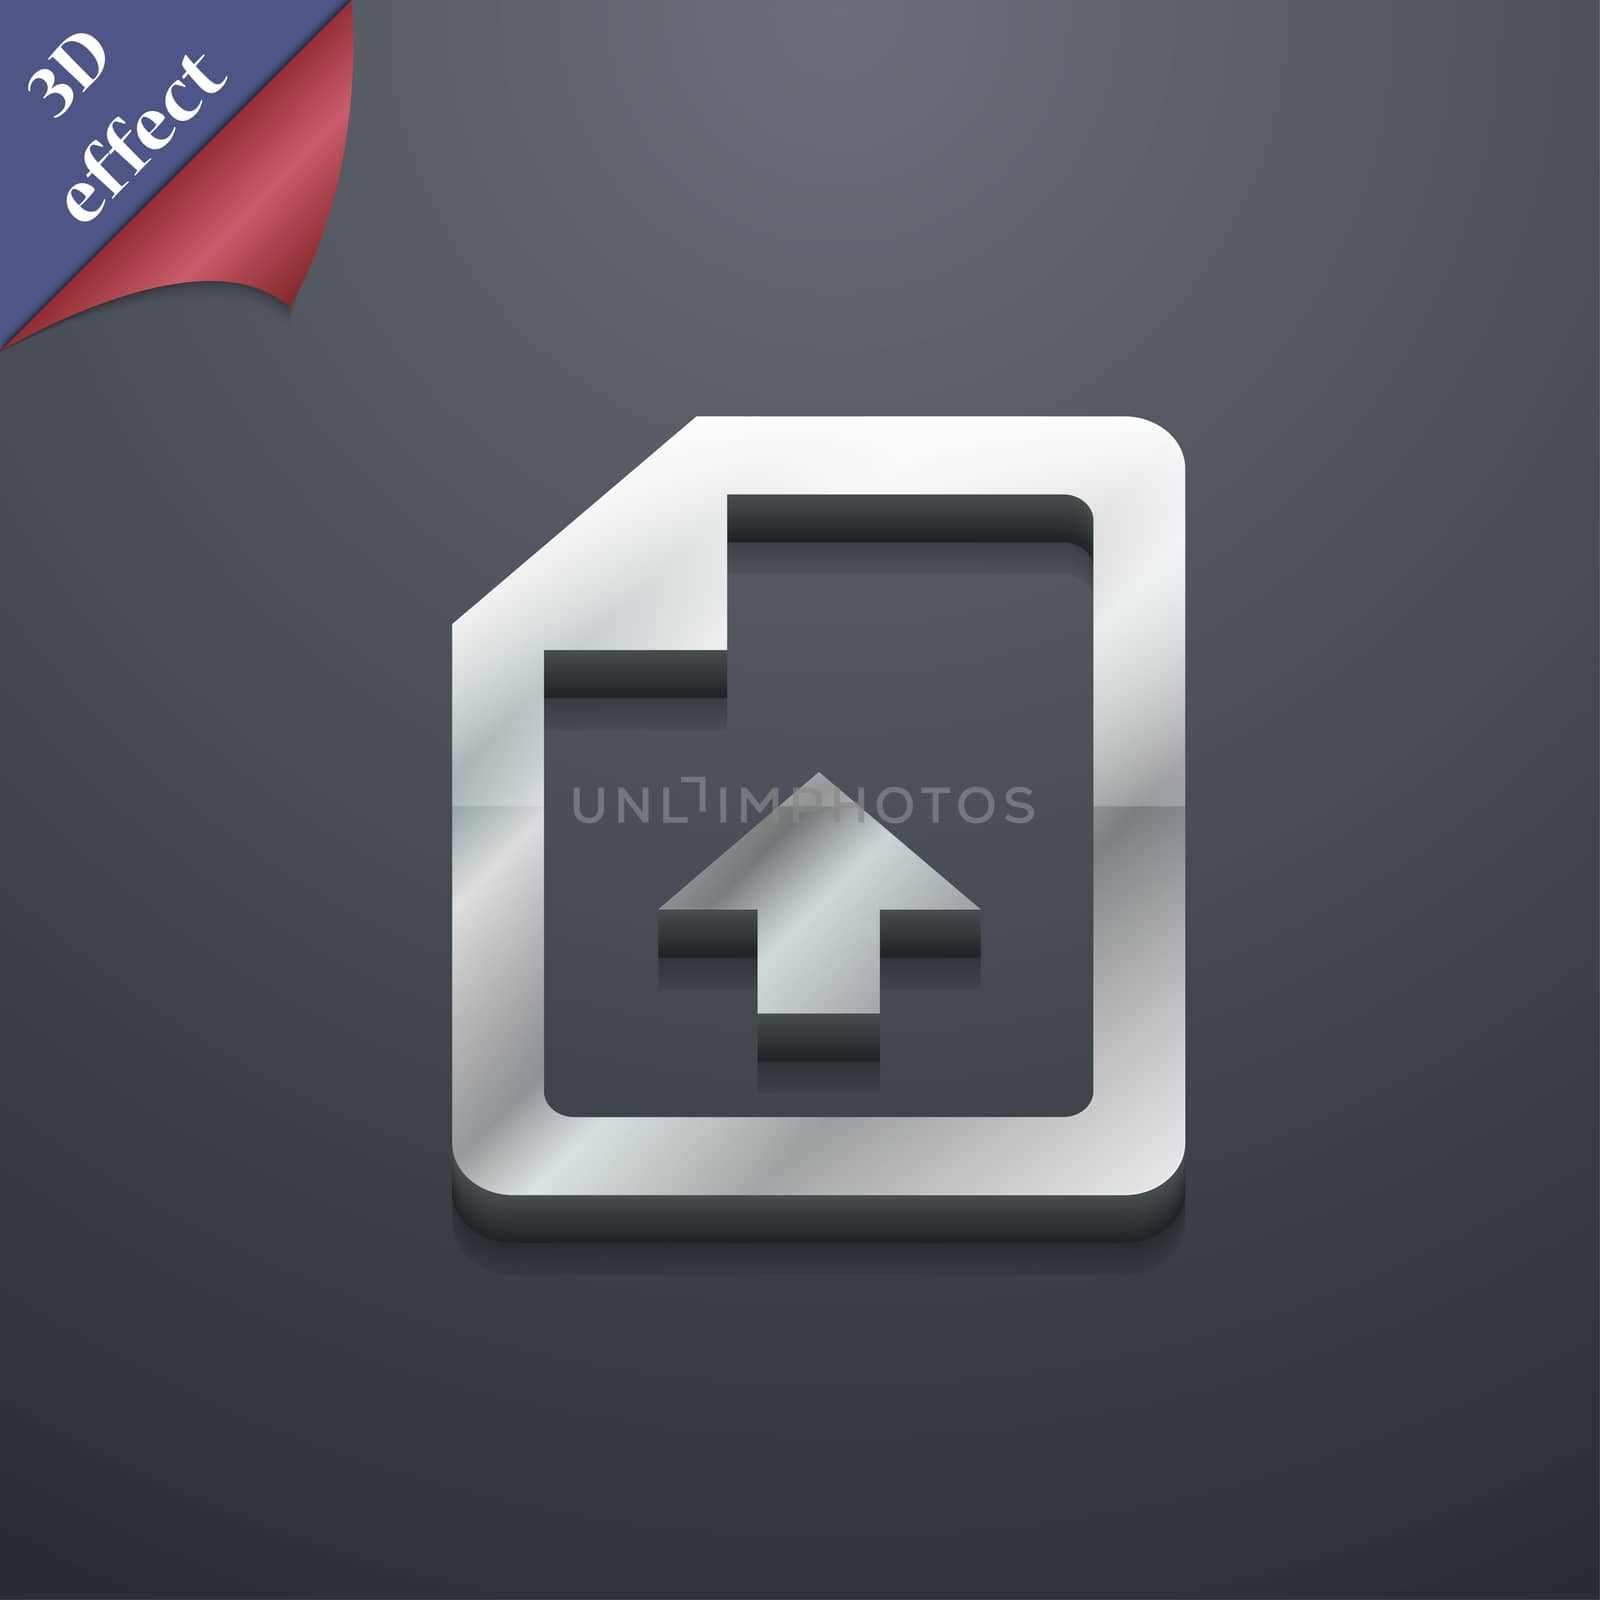 Export, Upload file icon symbol. 3D style. Trendy, modern design with space for your text illustration. Rastrized copy